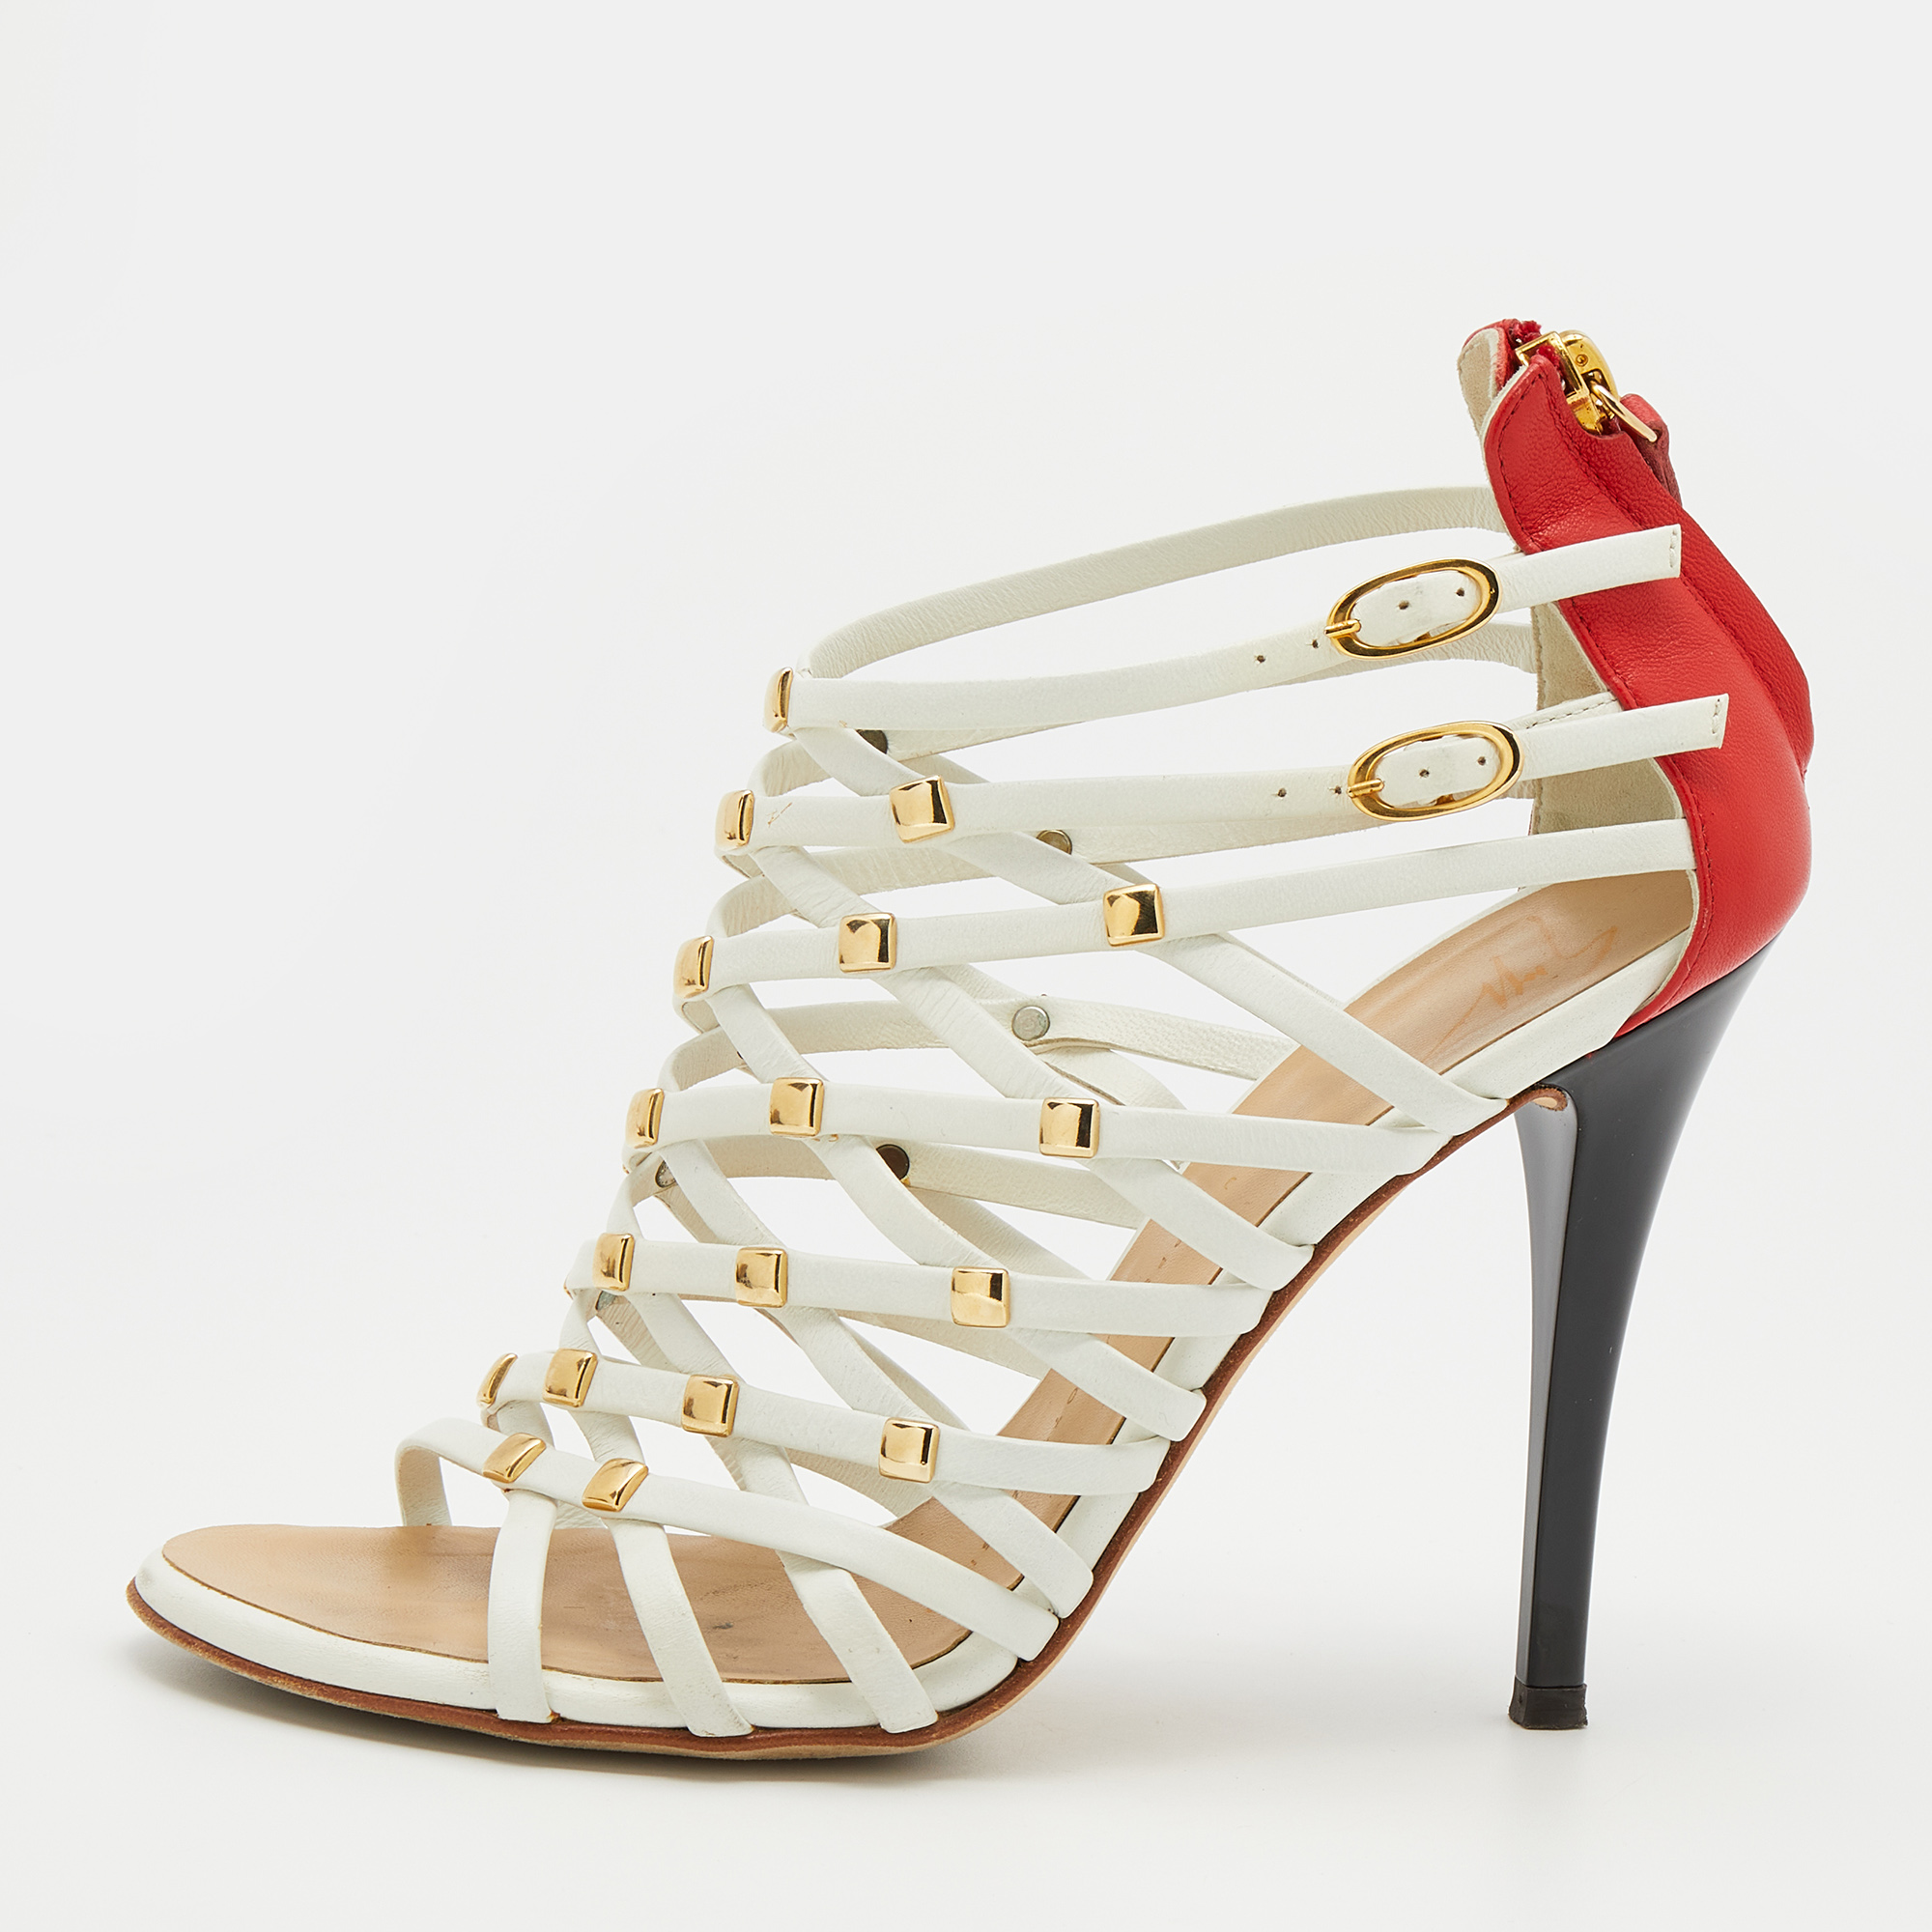 Giuseppe zanotti white/red leather embellished strappy sandals size 36